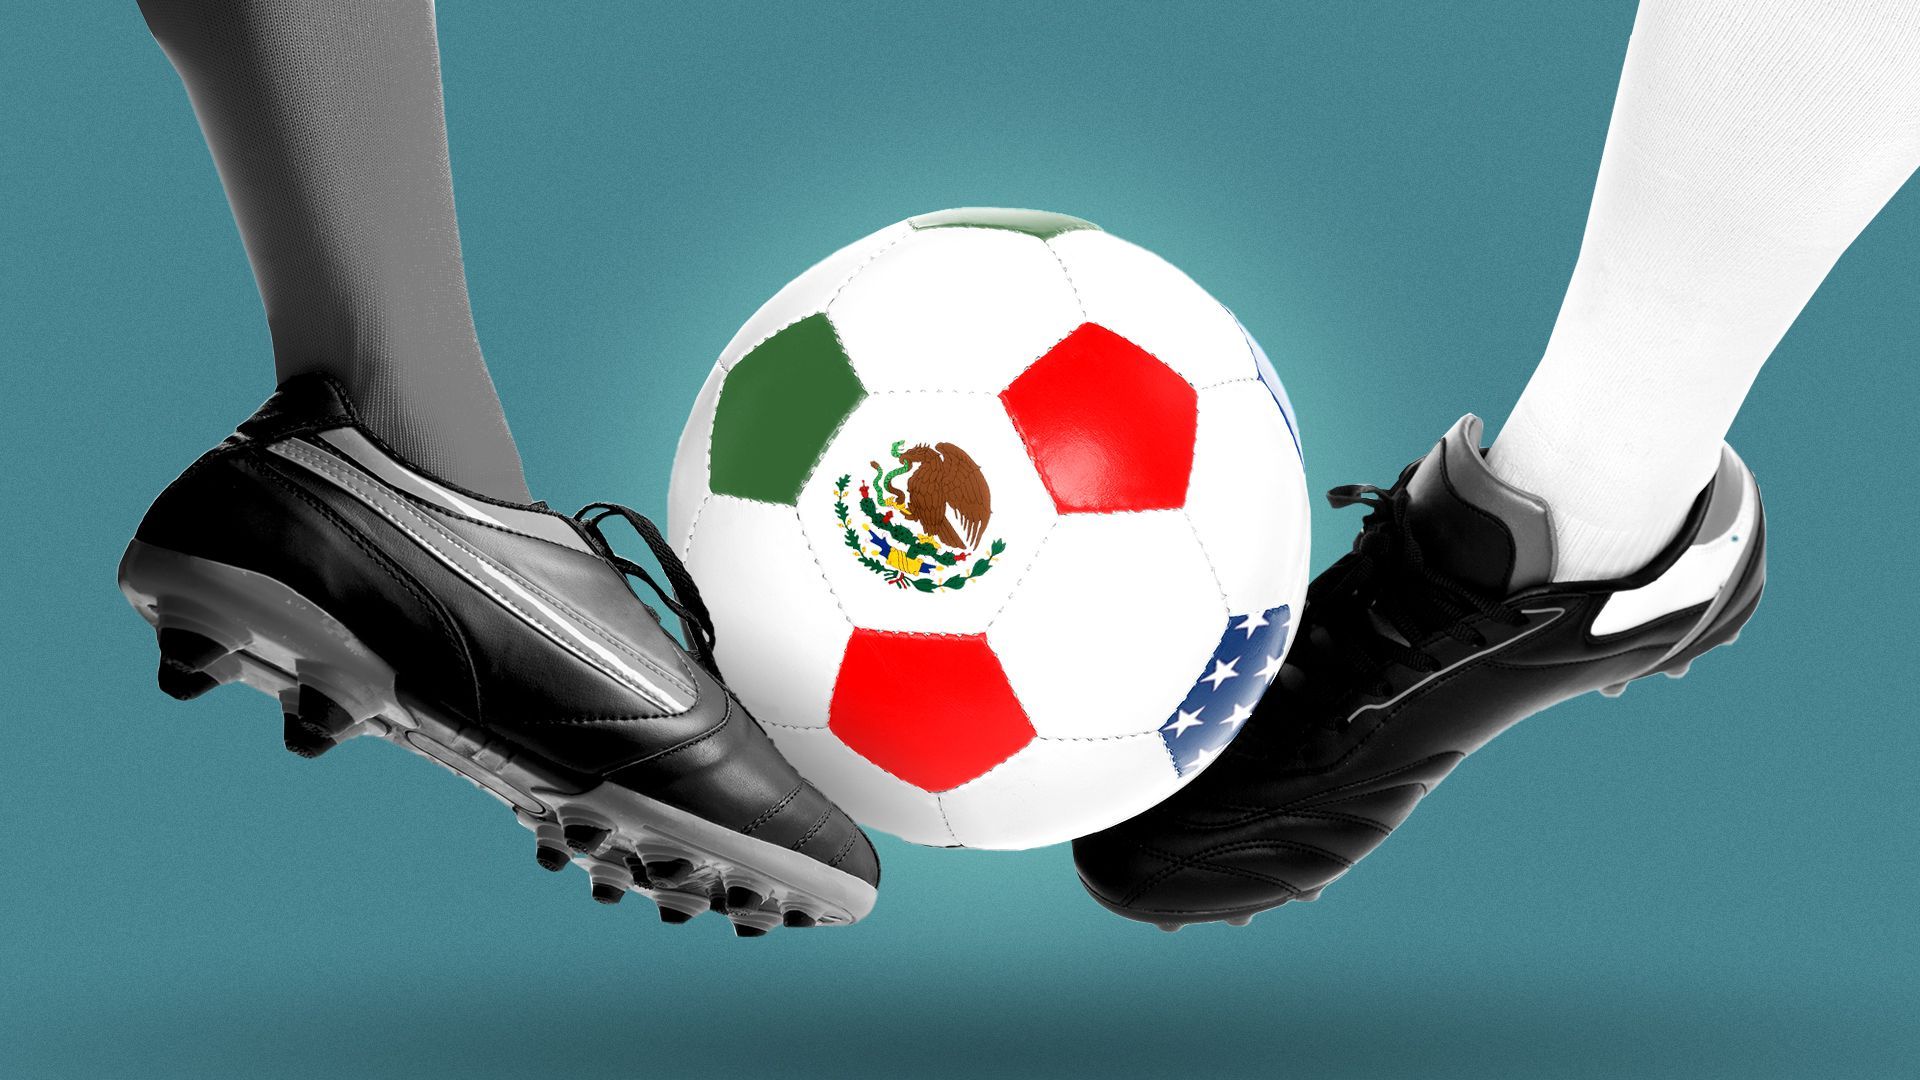 Illustration of two feet kicking a soccer ball which has colors and elements from both the U.S. and Mexico flags